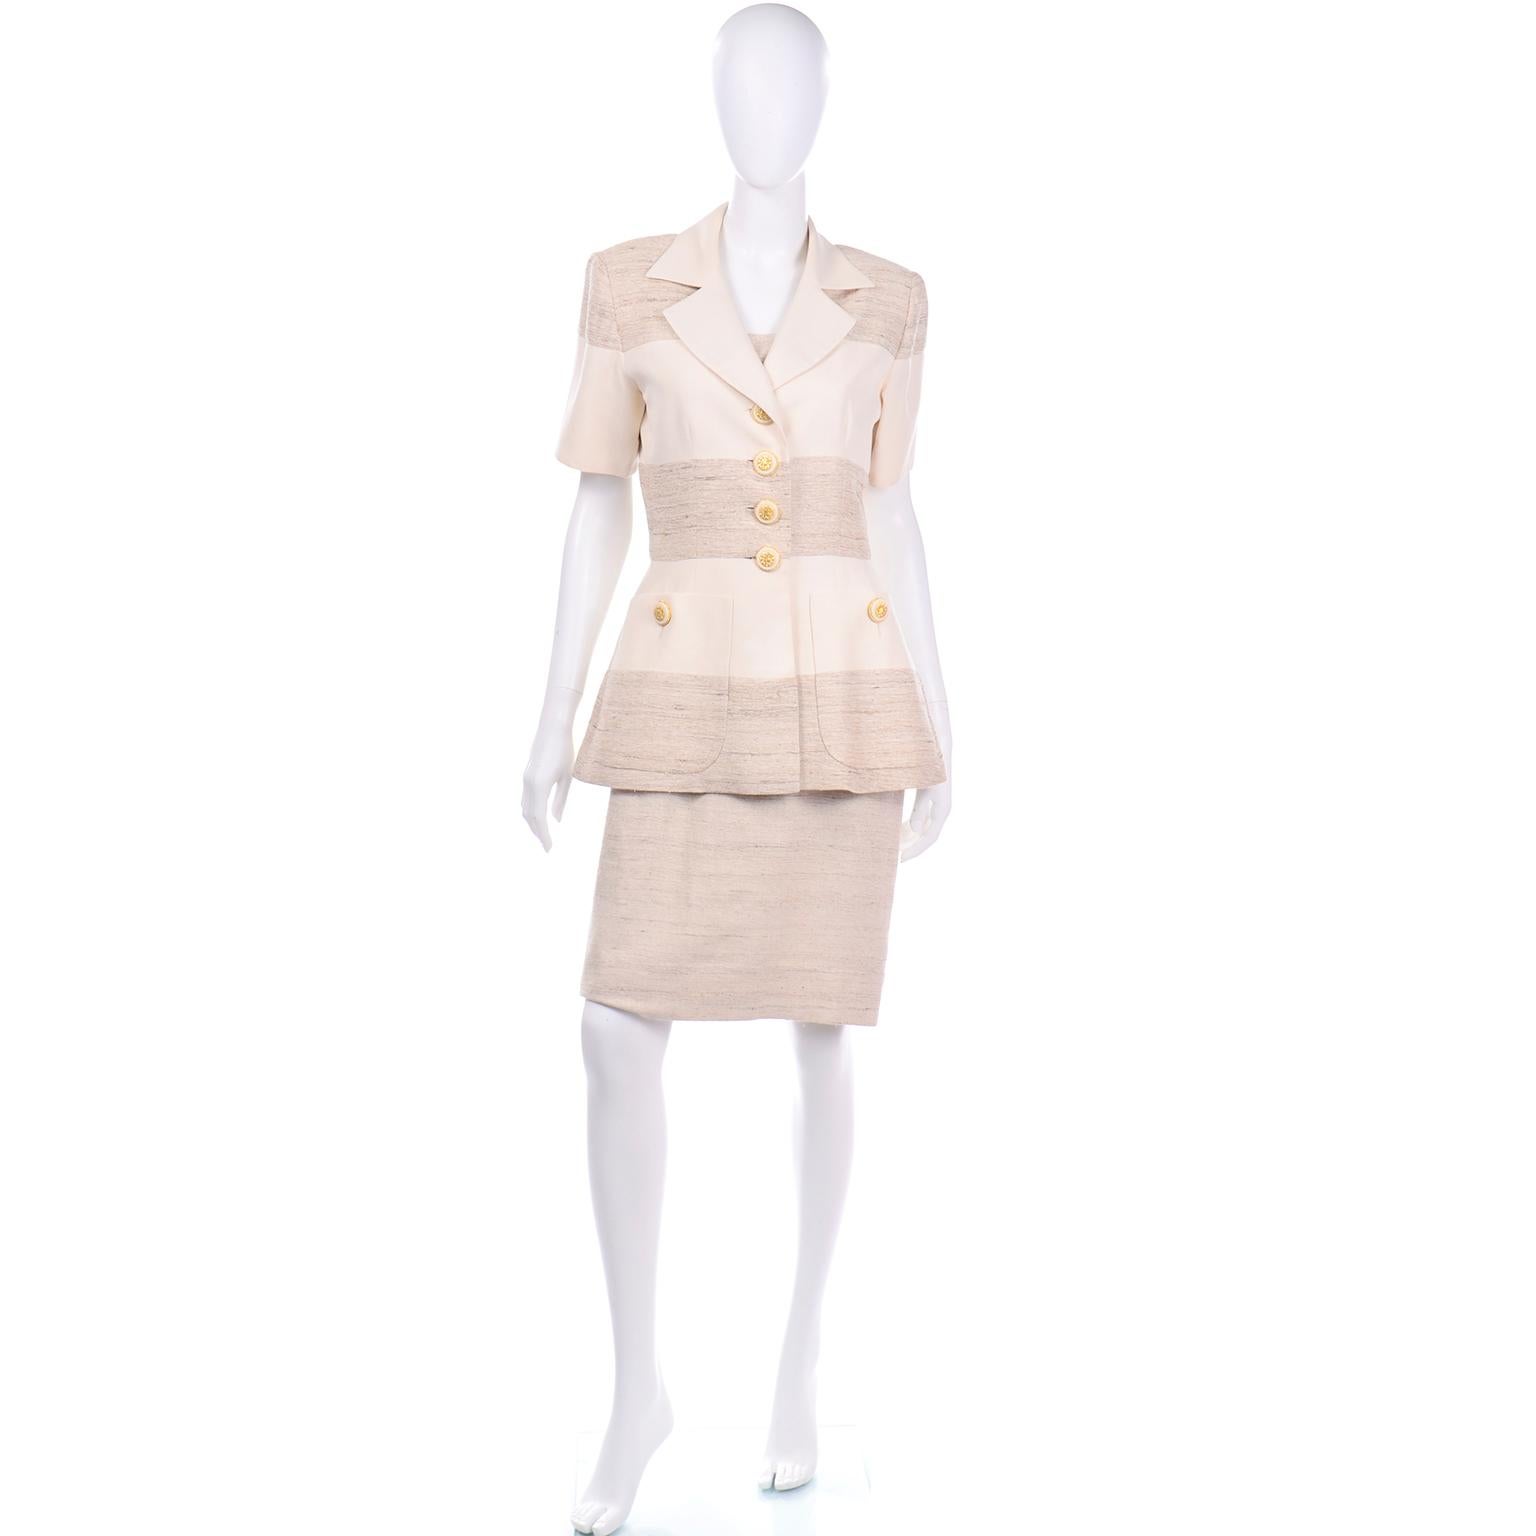 This is a beautifully made vintage Jacques Fath natural linen stripe short sleeve jacket with a sheath dress The sleeveless dress has a square neck and the waist is accentuated with darts, creating a flattering  silhouette. There is a back center